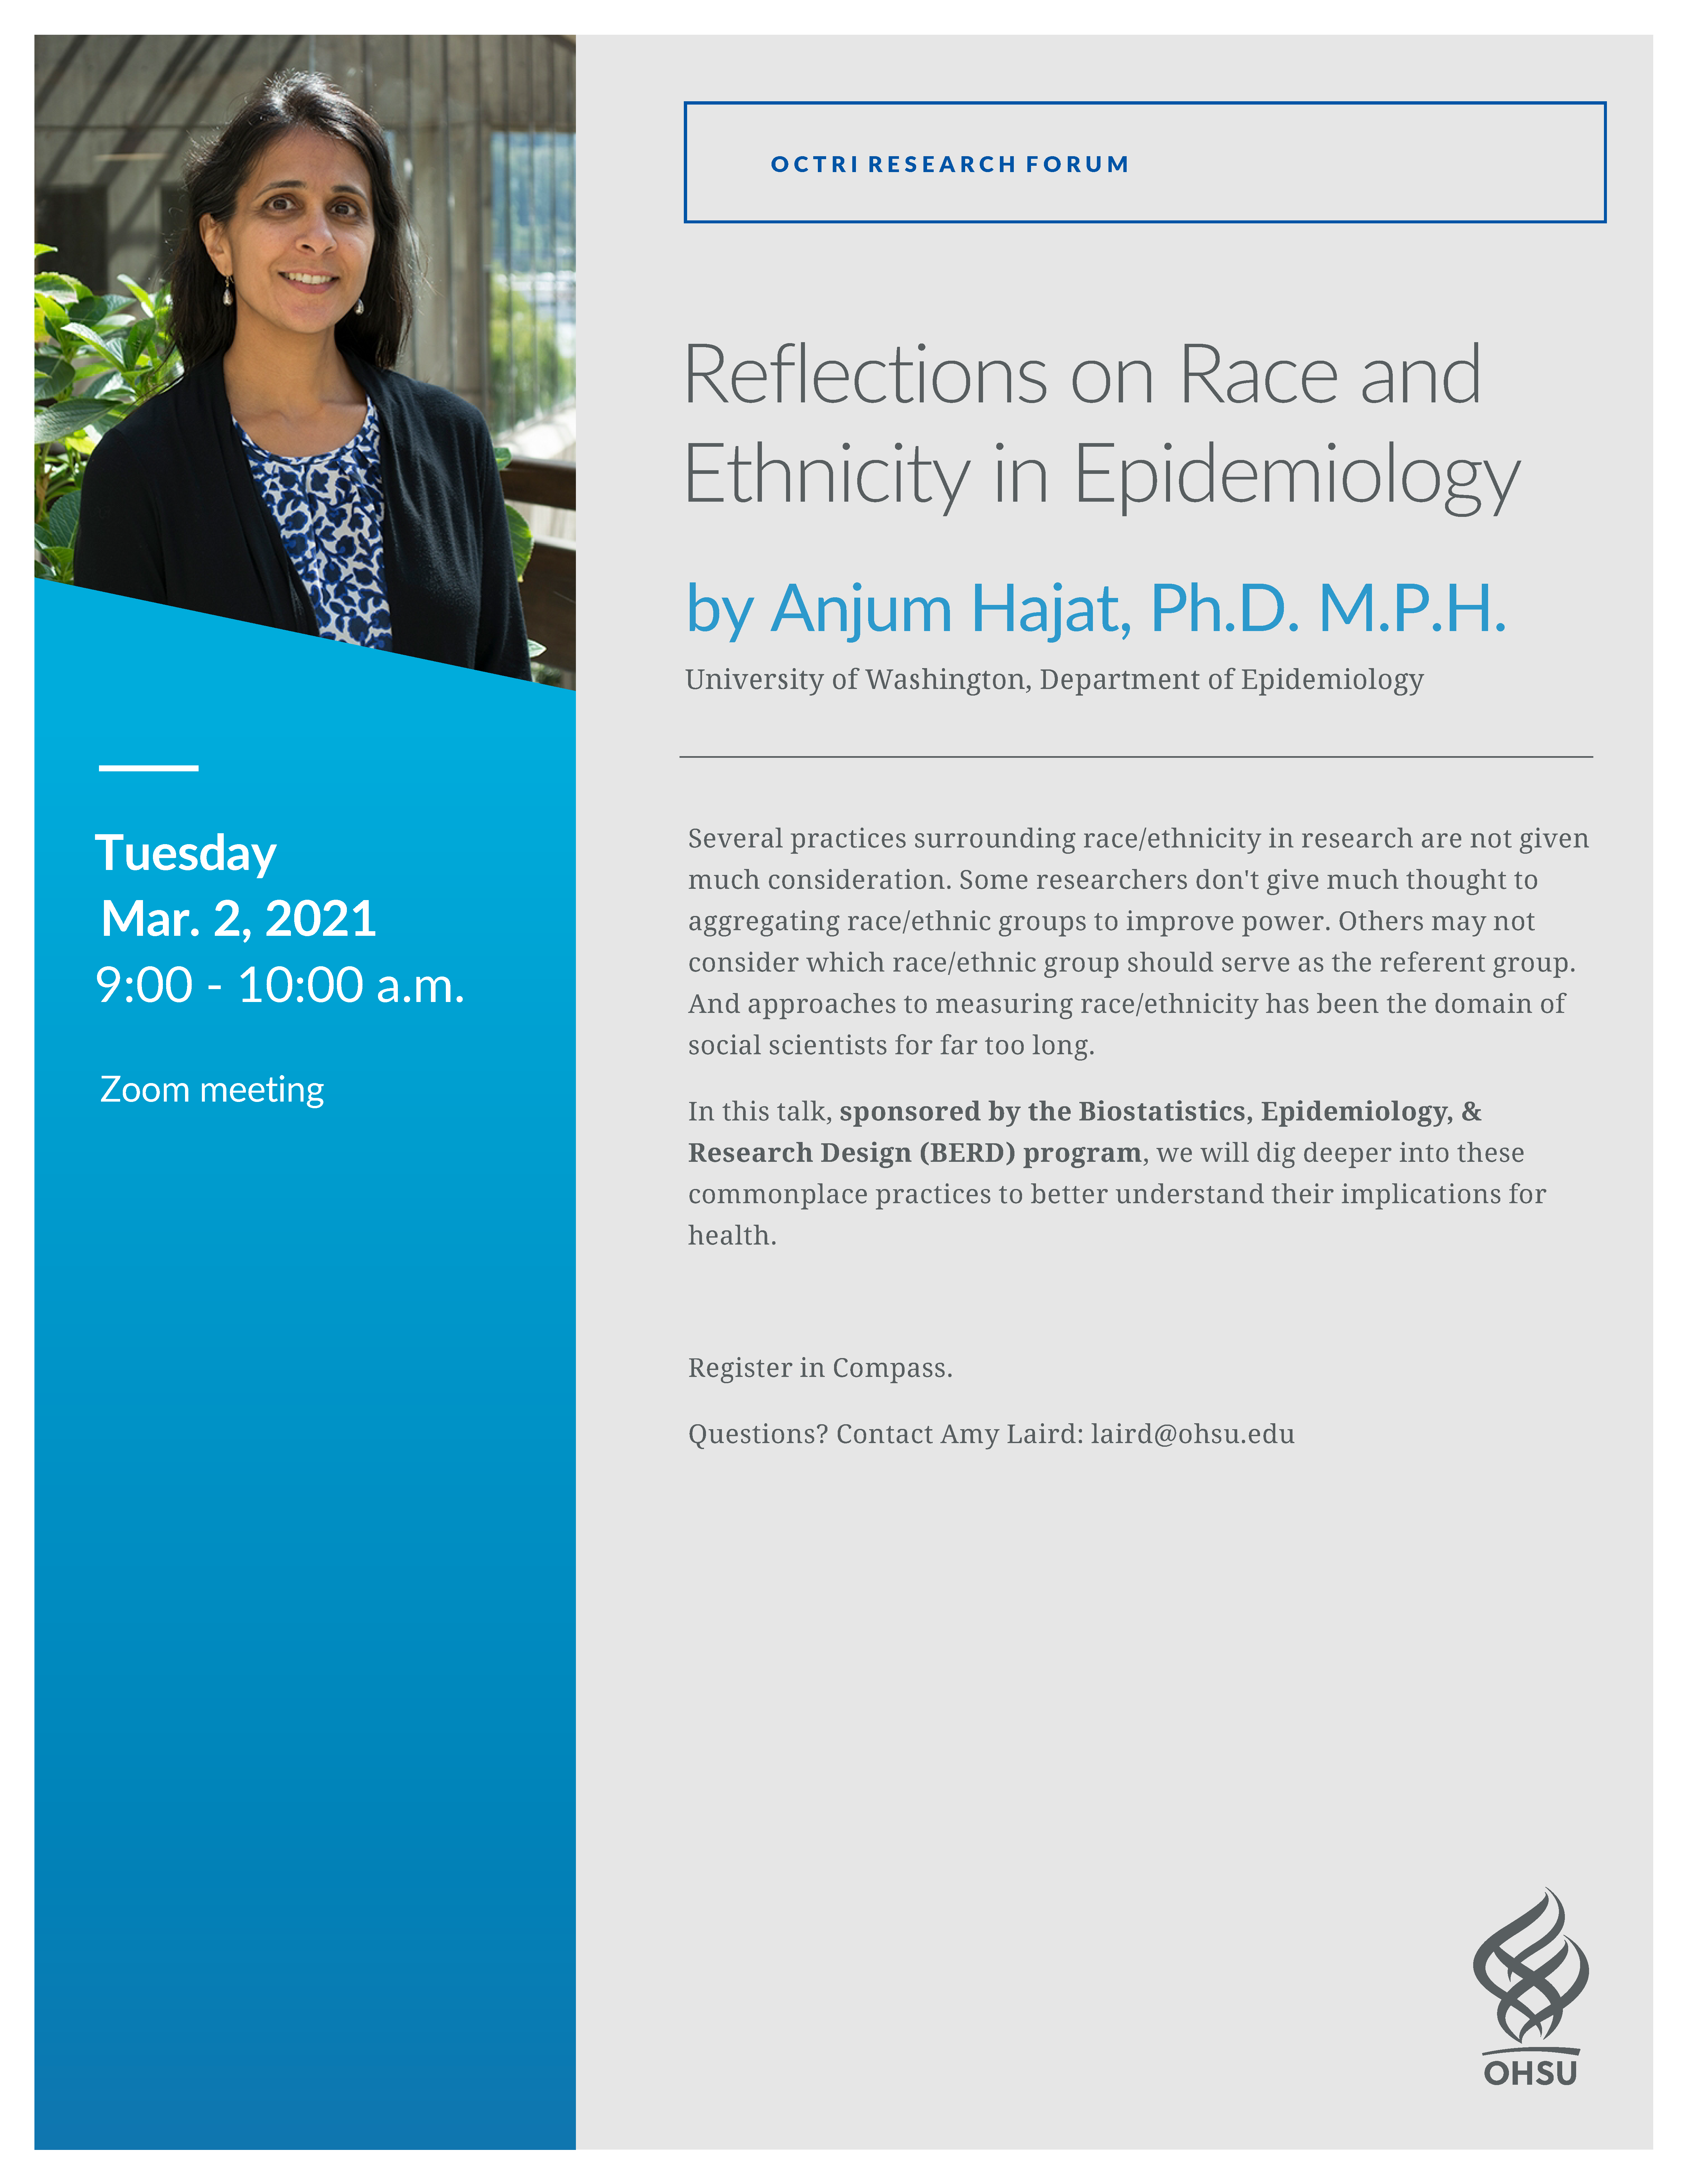 This is a flyer for OCTRI-BERD research forum on Reflections on Race and Ethnicity in Epidemiology on March 2, 2021.